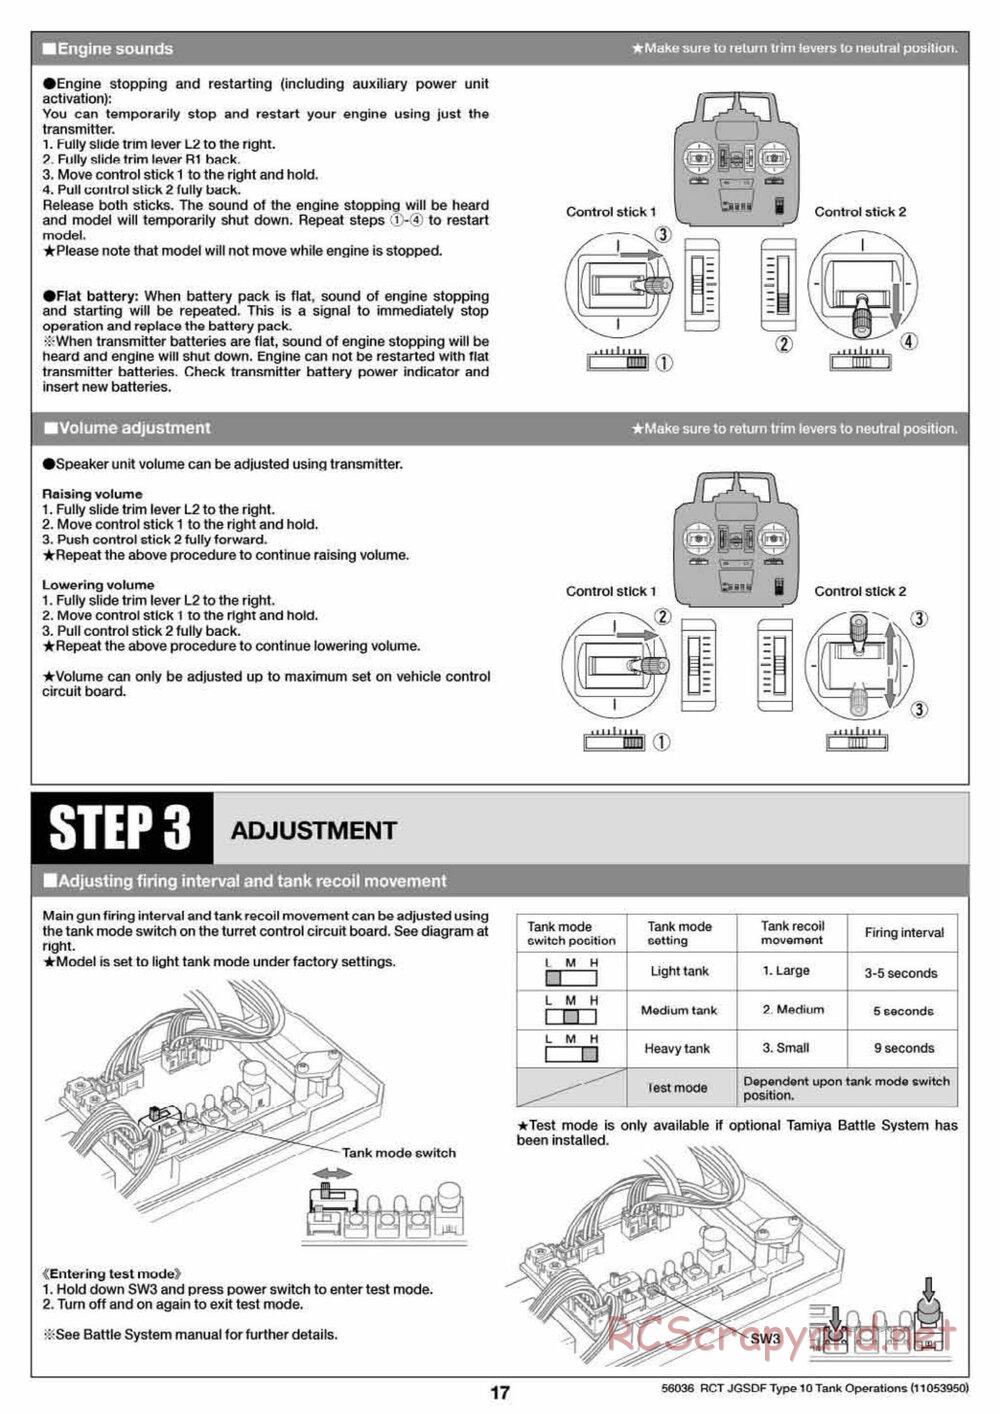 Tamiya - JGSDF Type 10 Tank - 1/16 Scale Chassis - Operation Manual - Page 7